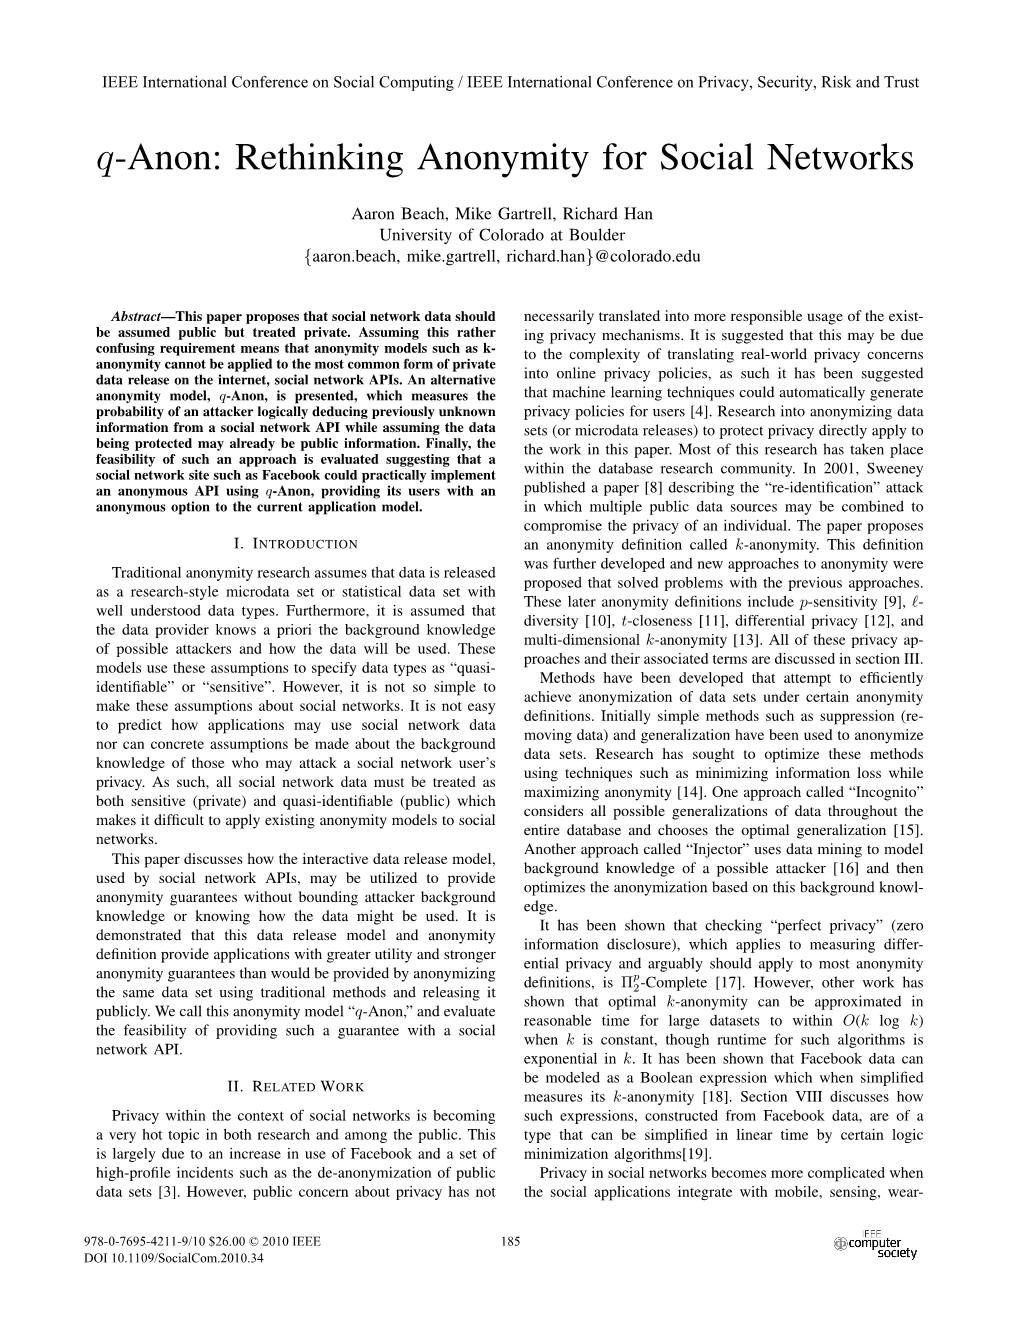 Q-Anon: Rethinking Anonymity for Social Networks